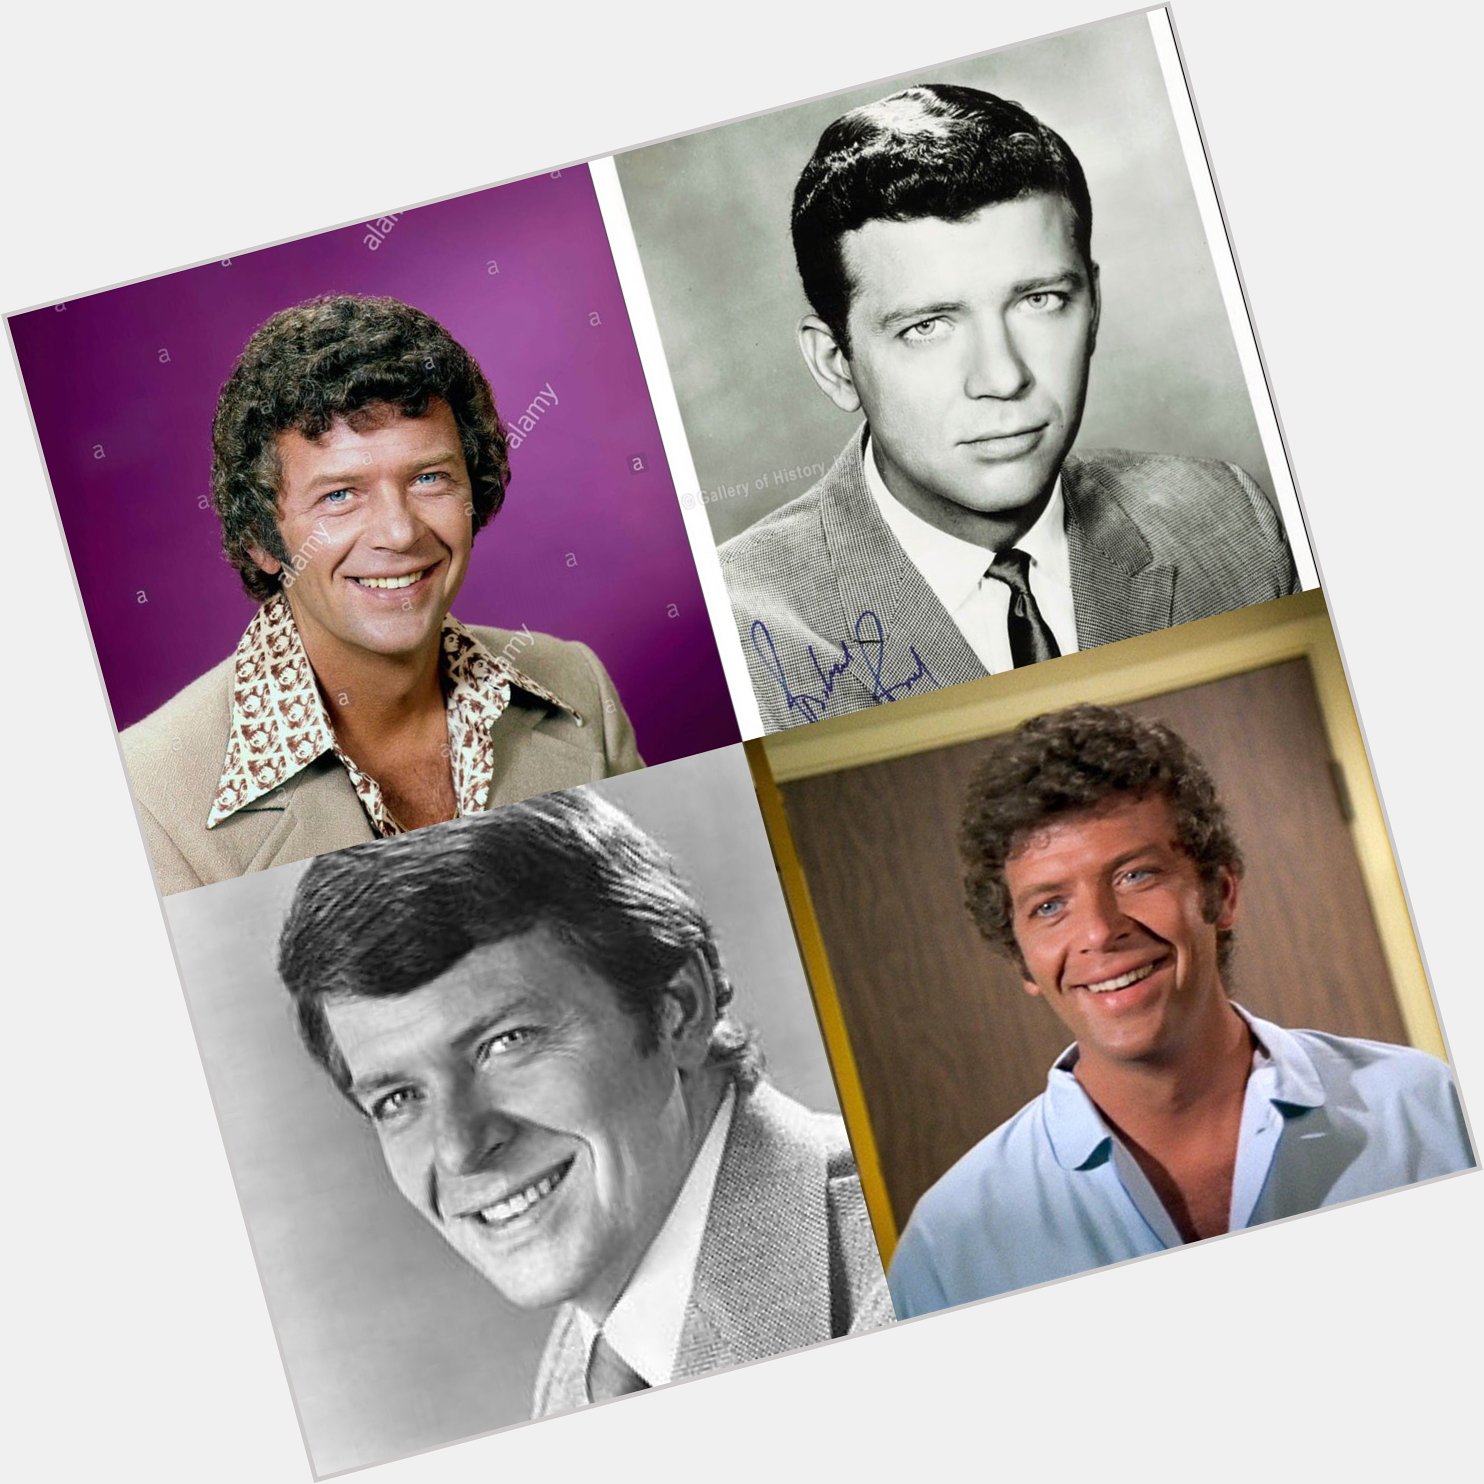 Happy 86 birthday to Robert Reed up in heaven. May he Rest In Peace.  